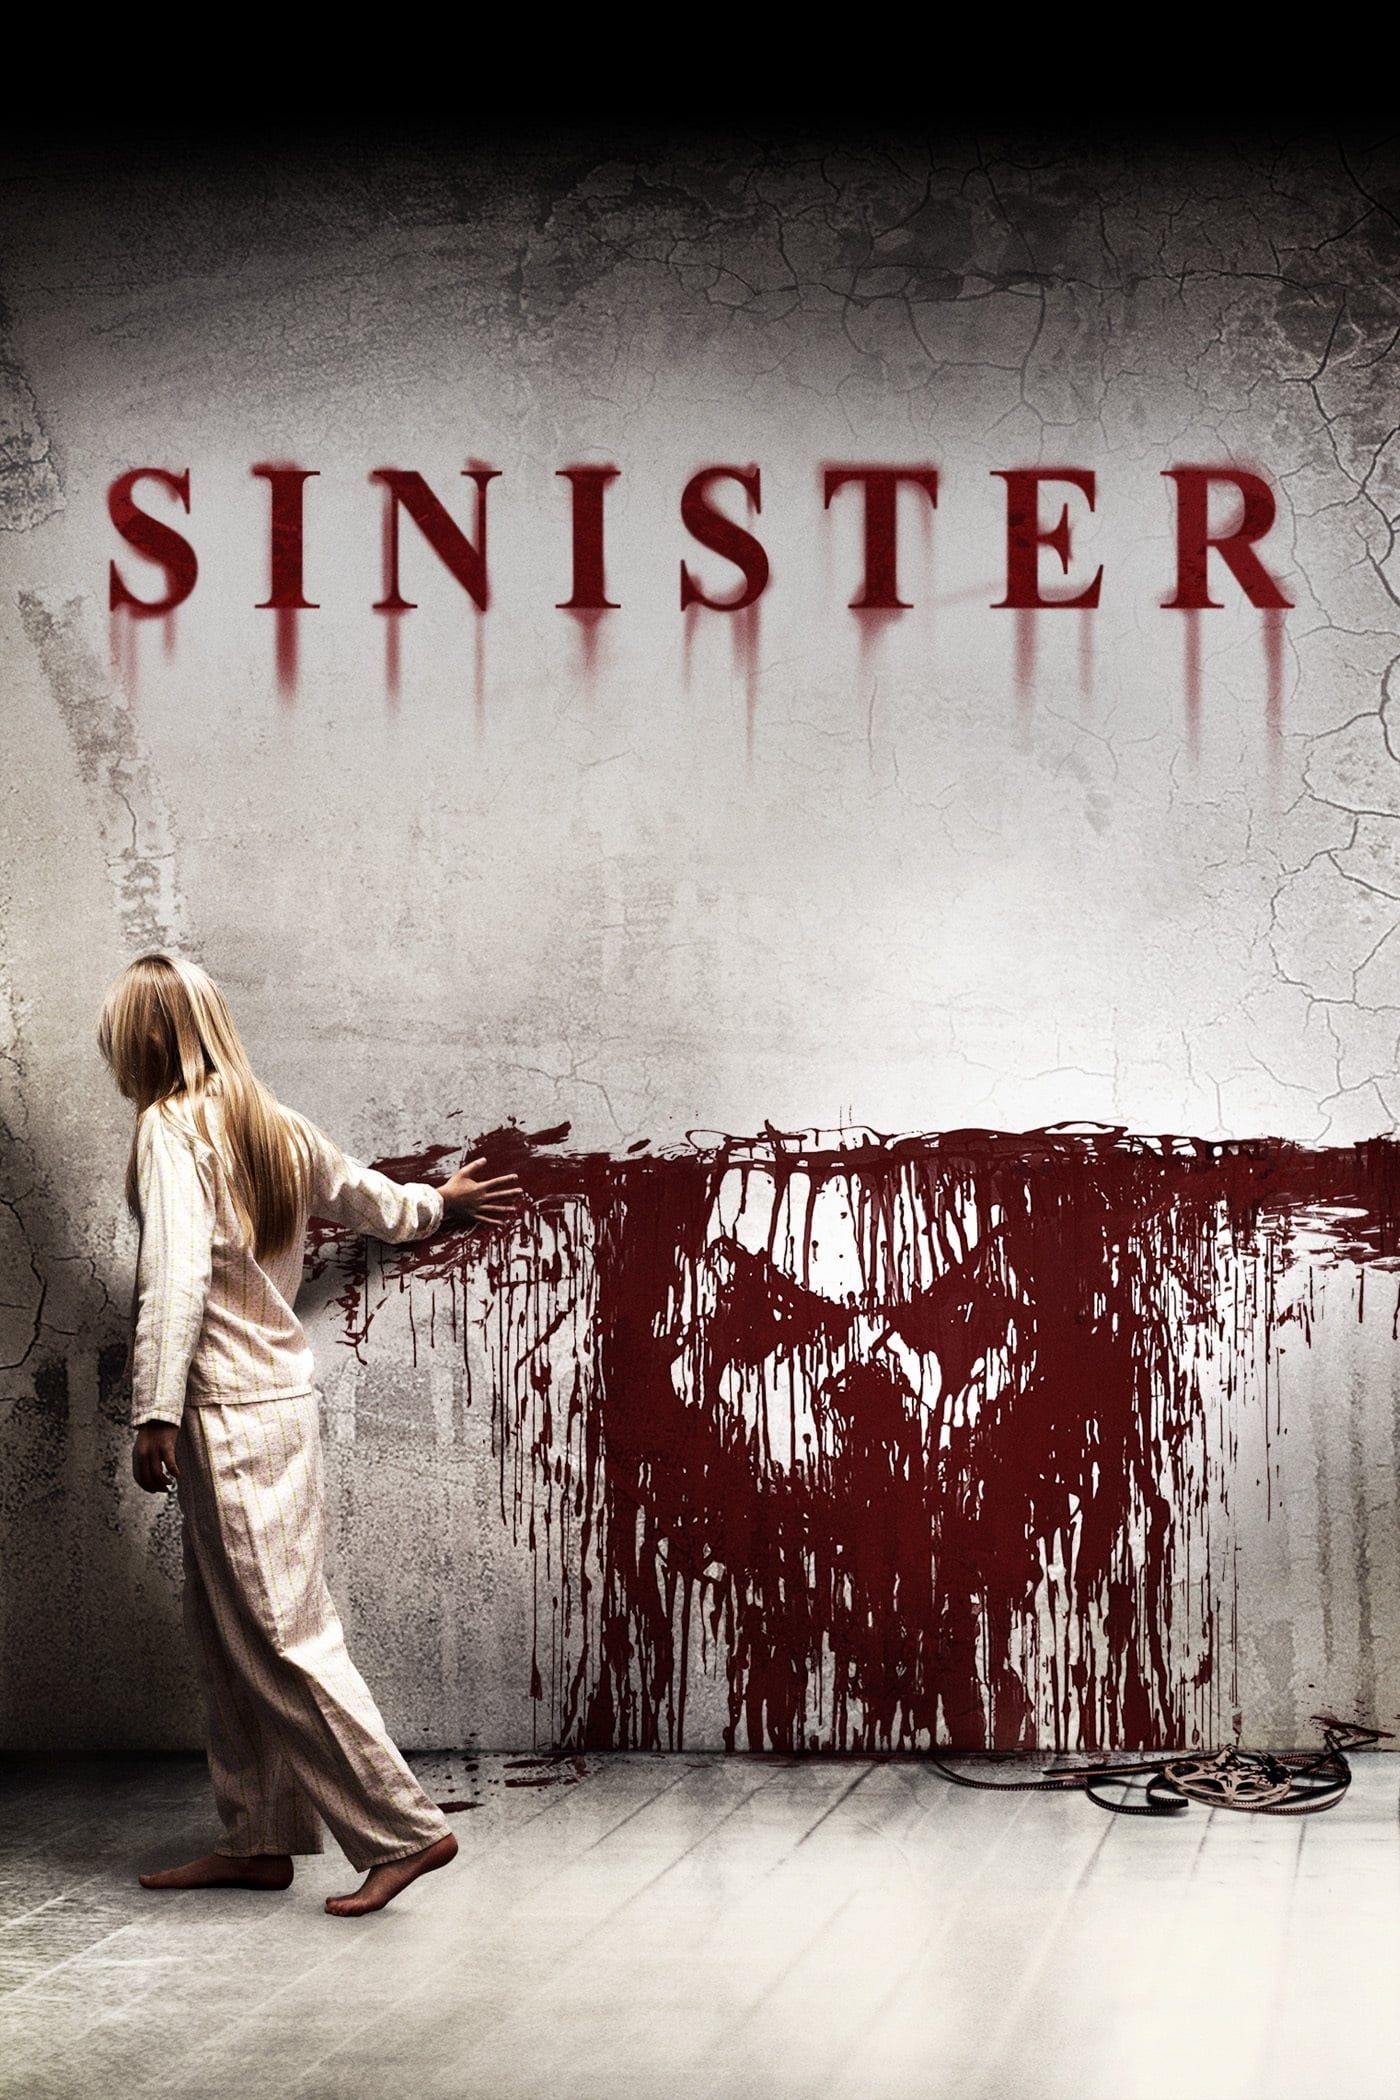 Sinister [HD] (2013)